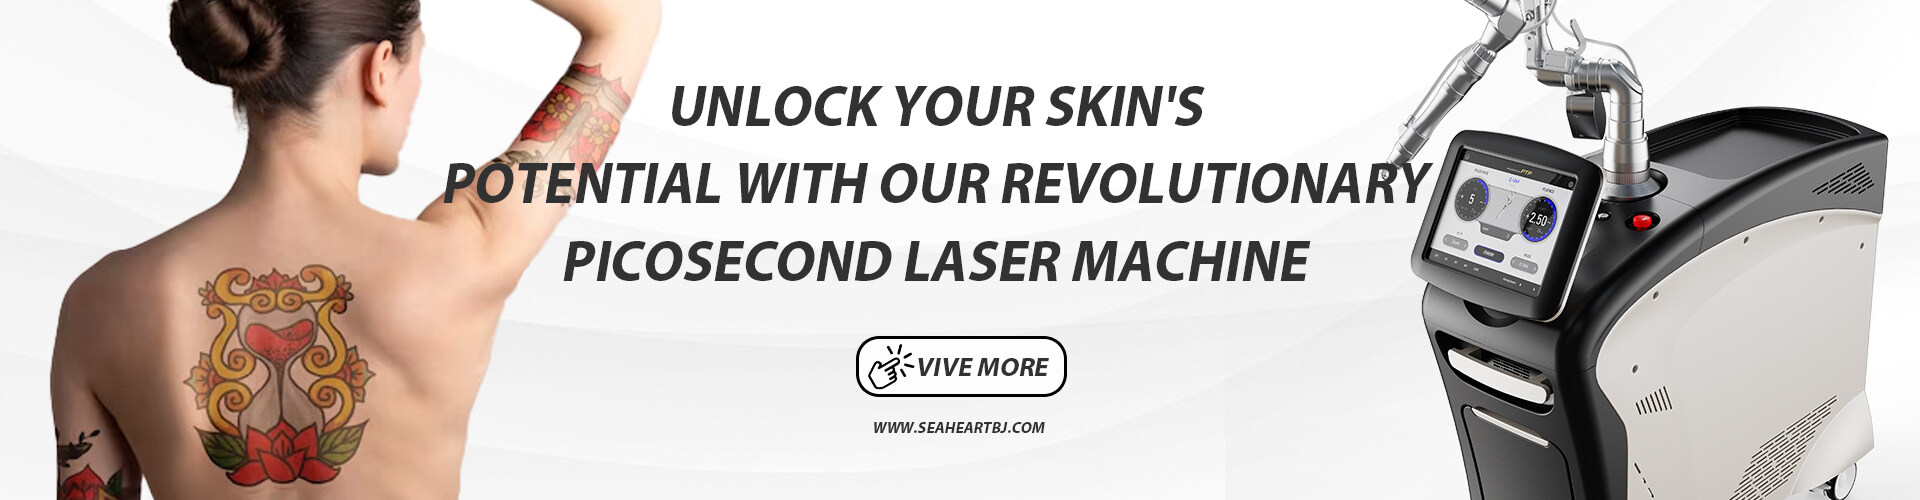 Desktop Q-Switch ND YAG Laser for Tattoo and Pigment Removal,Advanced Picosecond Laser Machine for Tattoo Removal Professional Laser Tattoo Removal Machine for Sale,Advanced Q-Switched Nd:YAG Laser Machine Professional Nd:YAG Laser Machine for Tattoo Removal